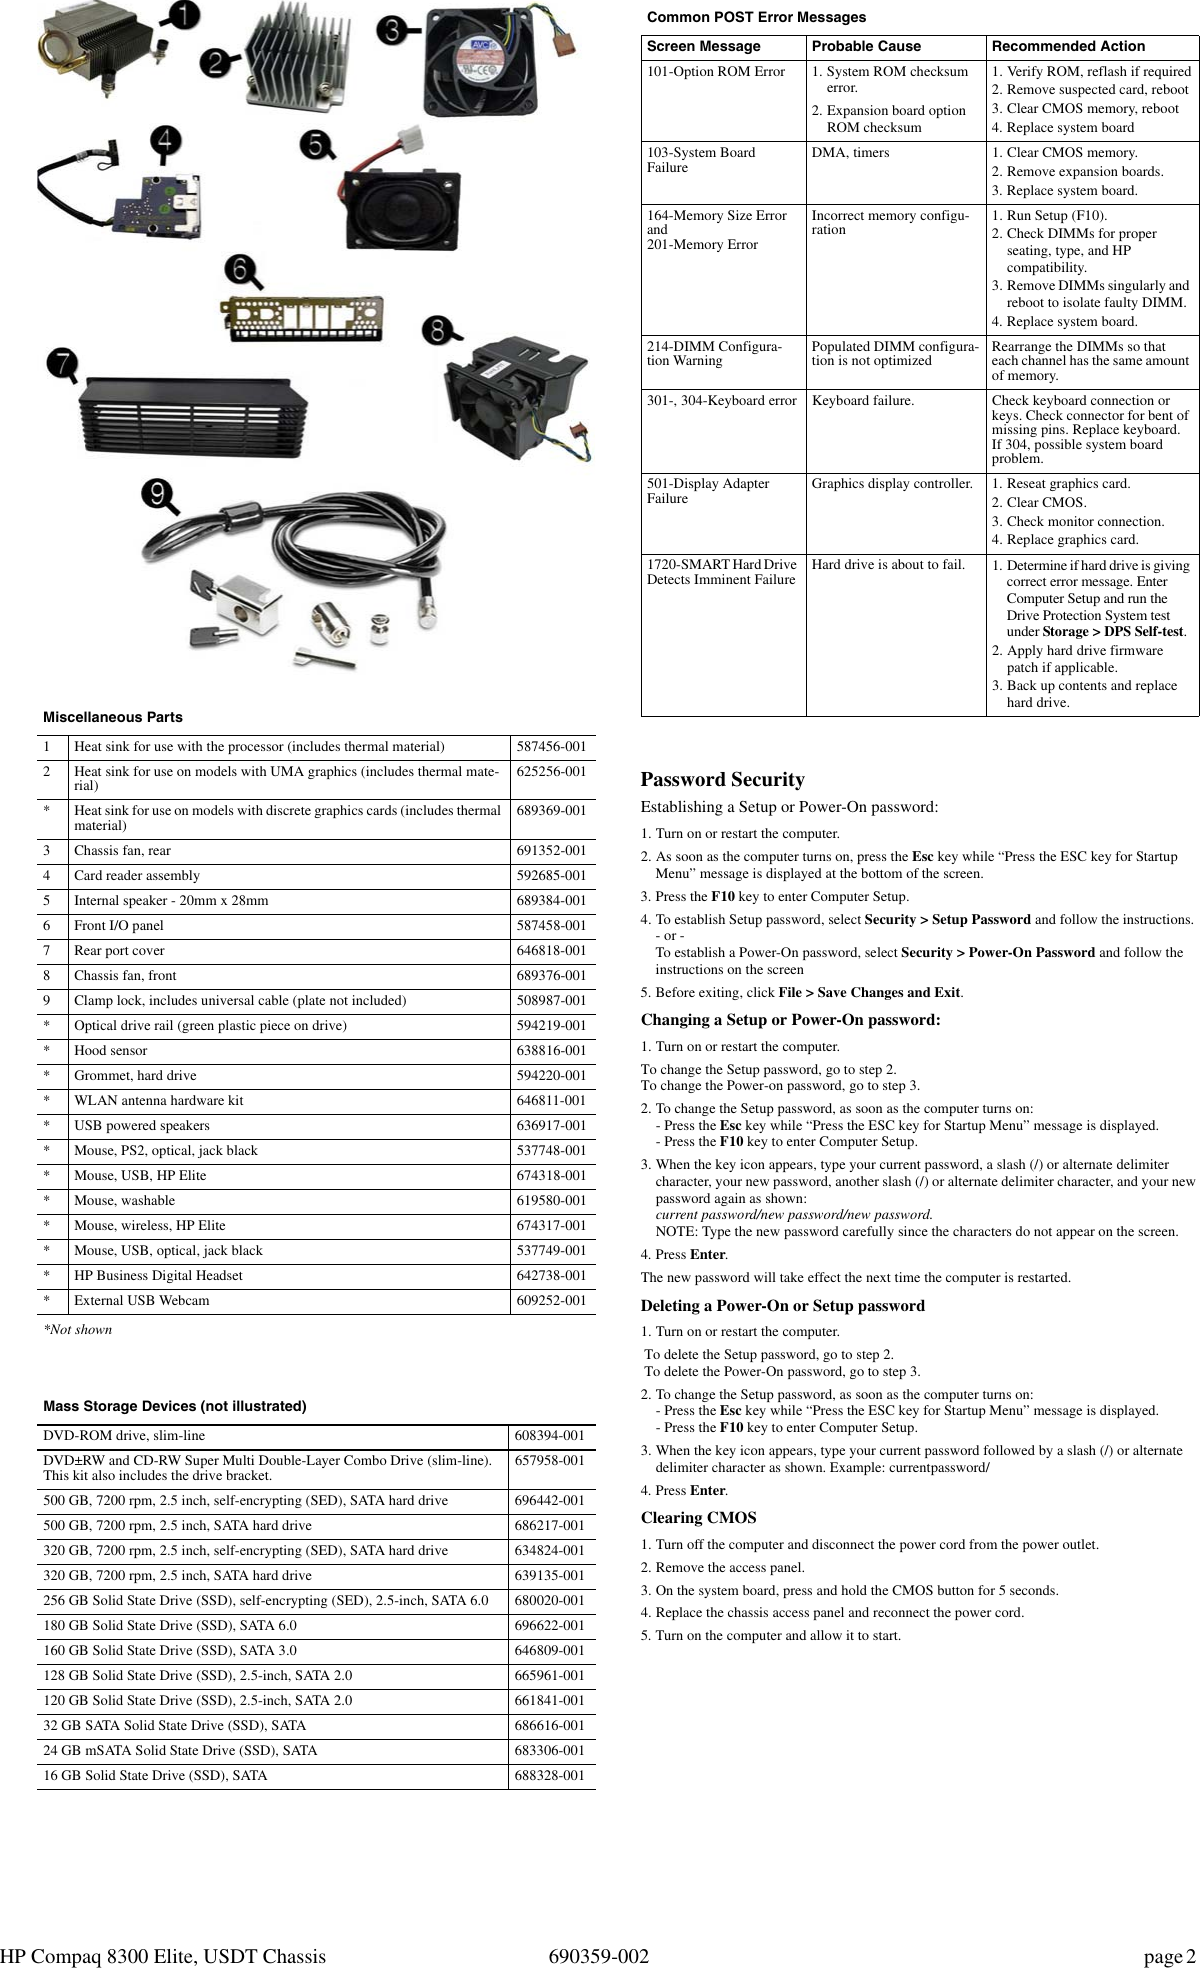 Page 2 of 4 - Hp Hp-Compaq-Elite-8300-Ultra-Slim-Pc-Reference-Guide- Inventors USDT IPSM - Win8  Hp-compaq-elite-8300-ultra-slim-pc-reference-guide